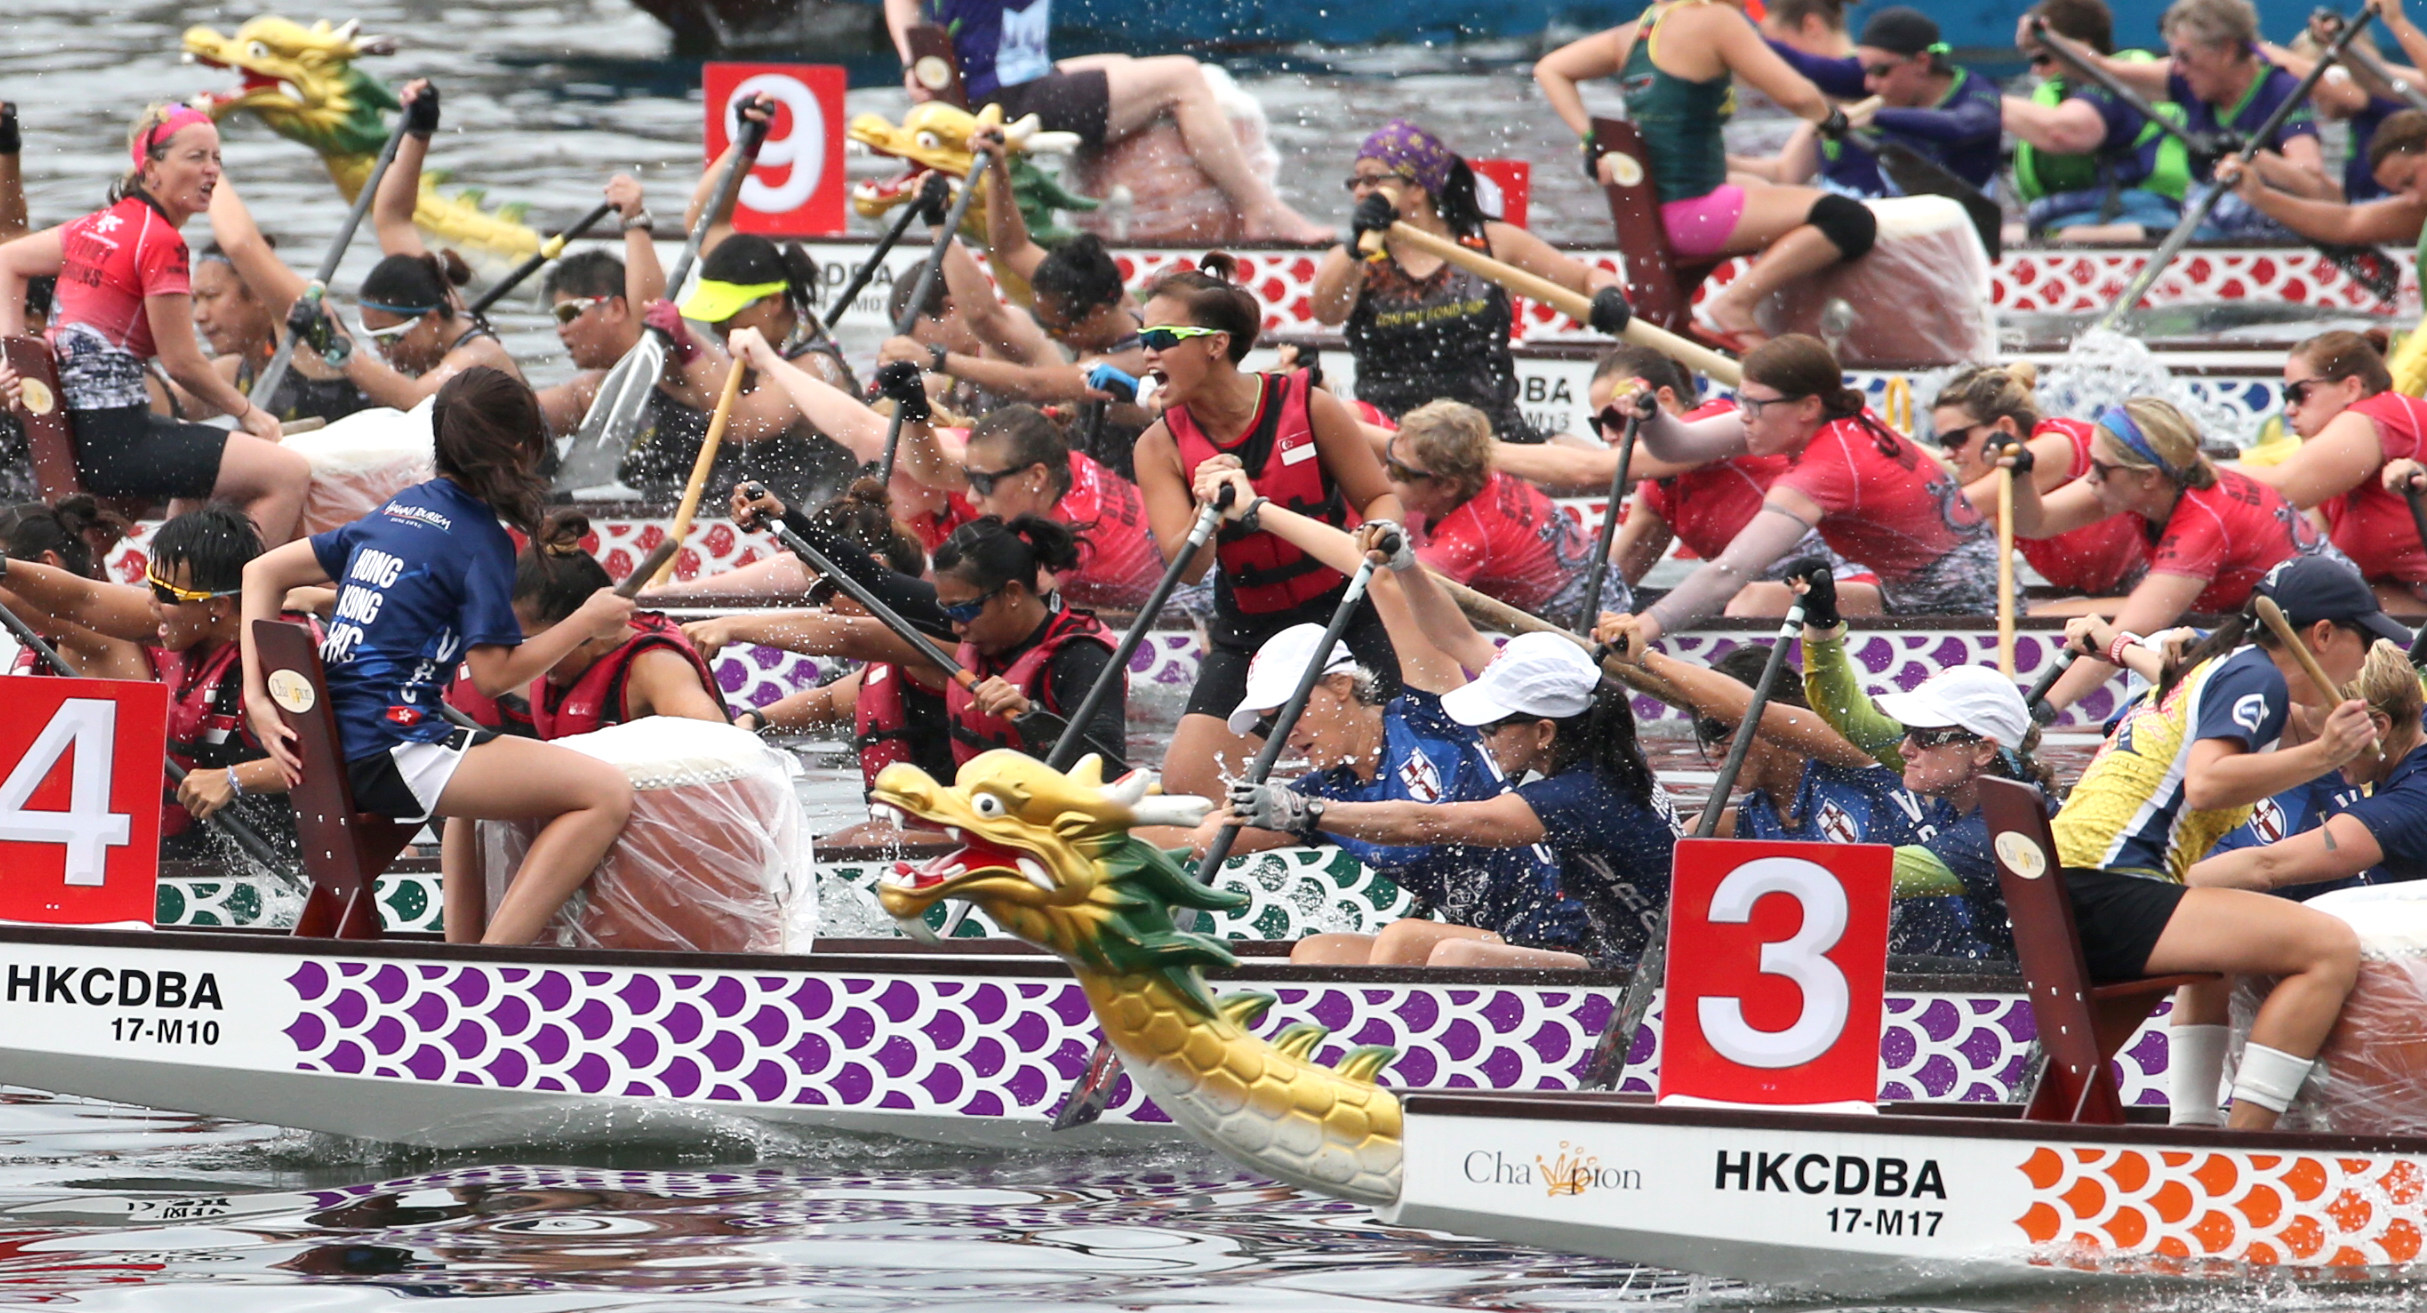 The governing body aims to revive the annual International Dragon Boat Races in 2023. Photo: KY Cheng